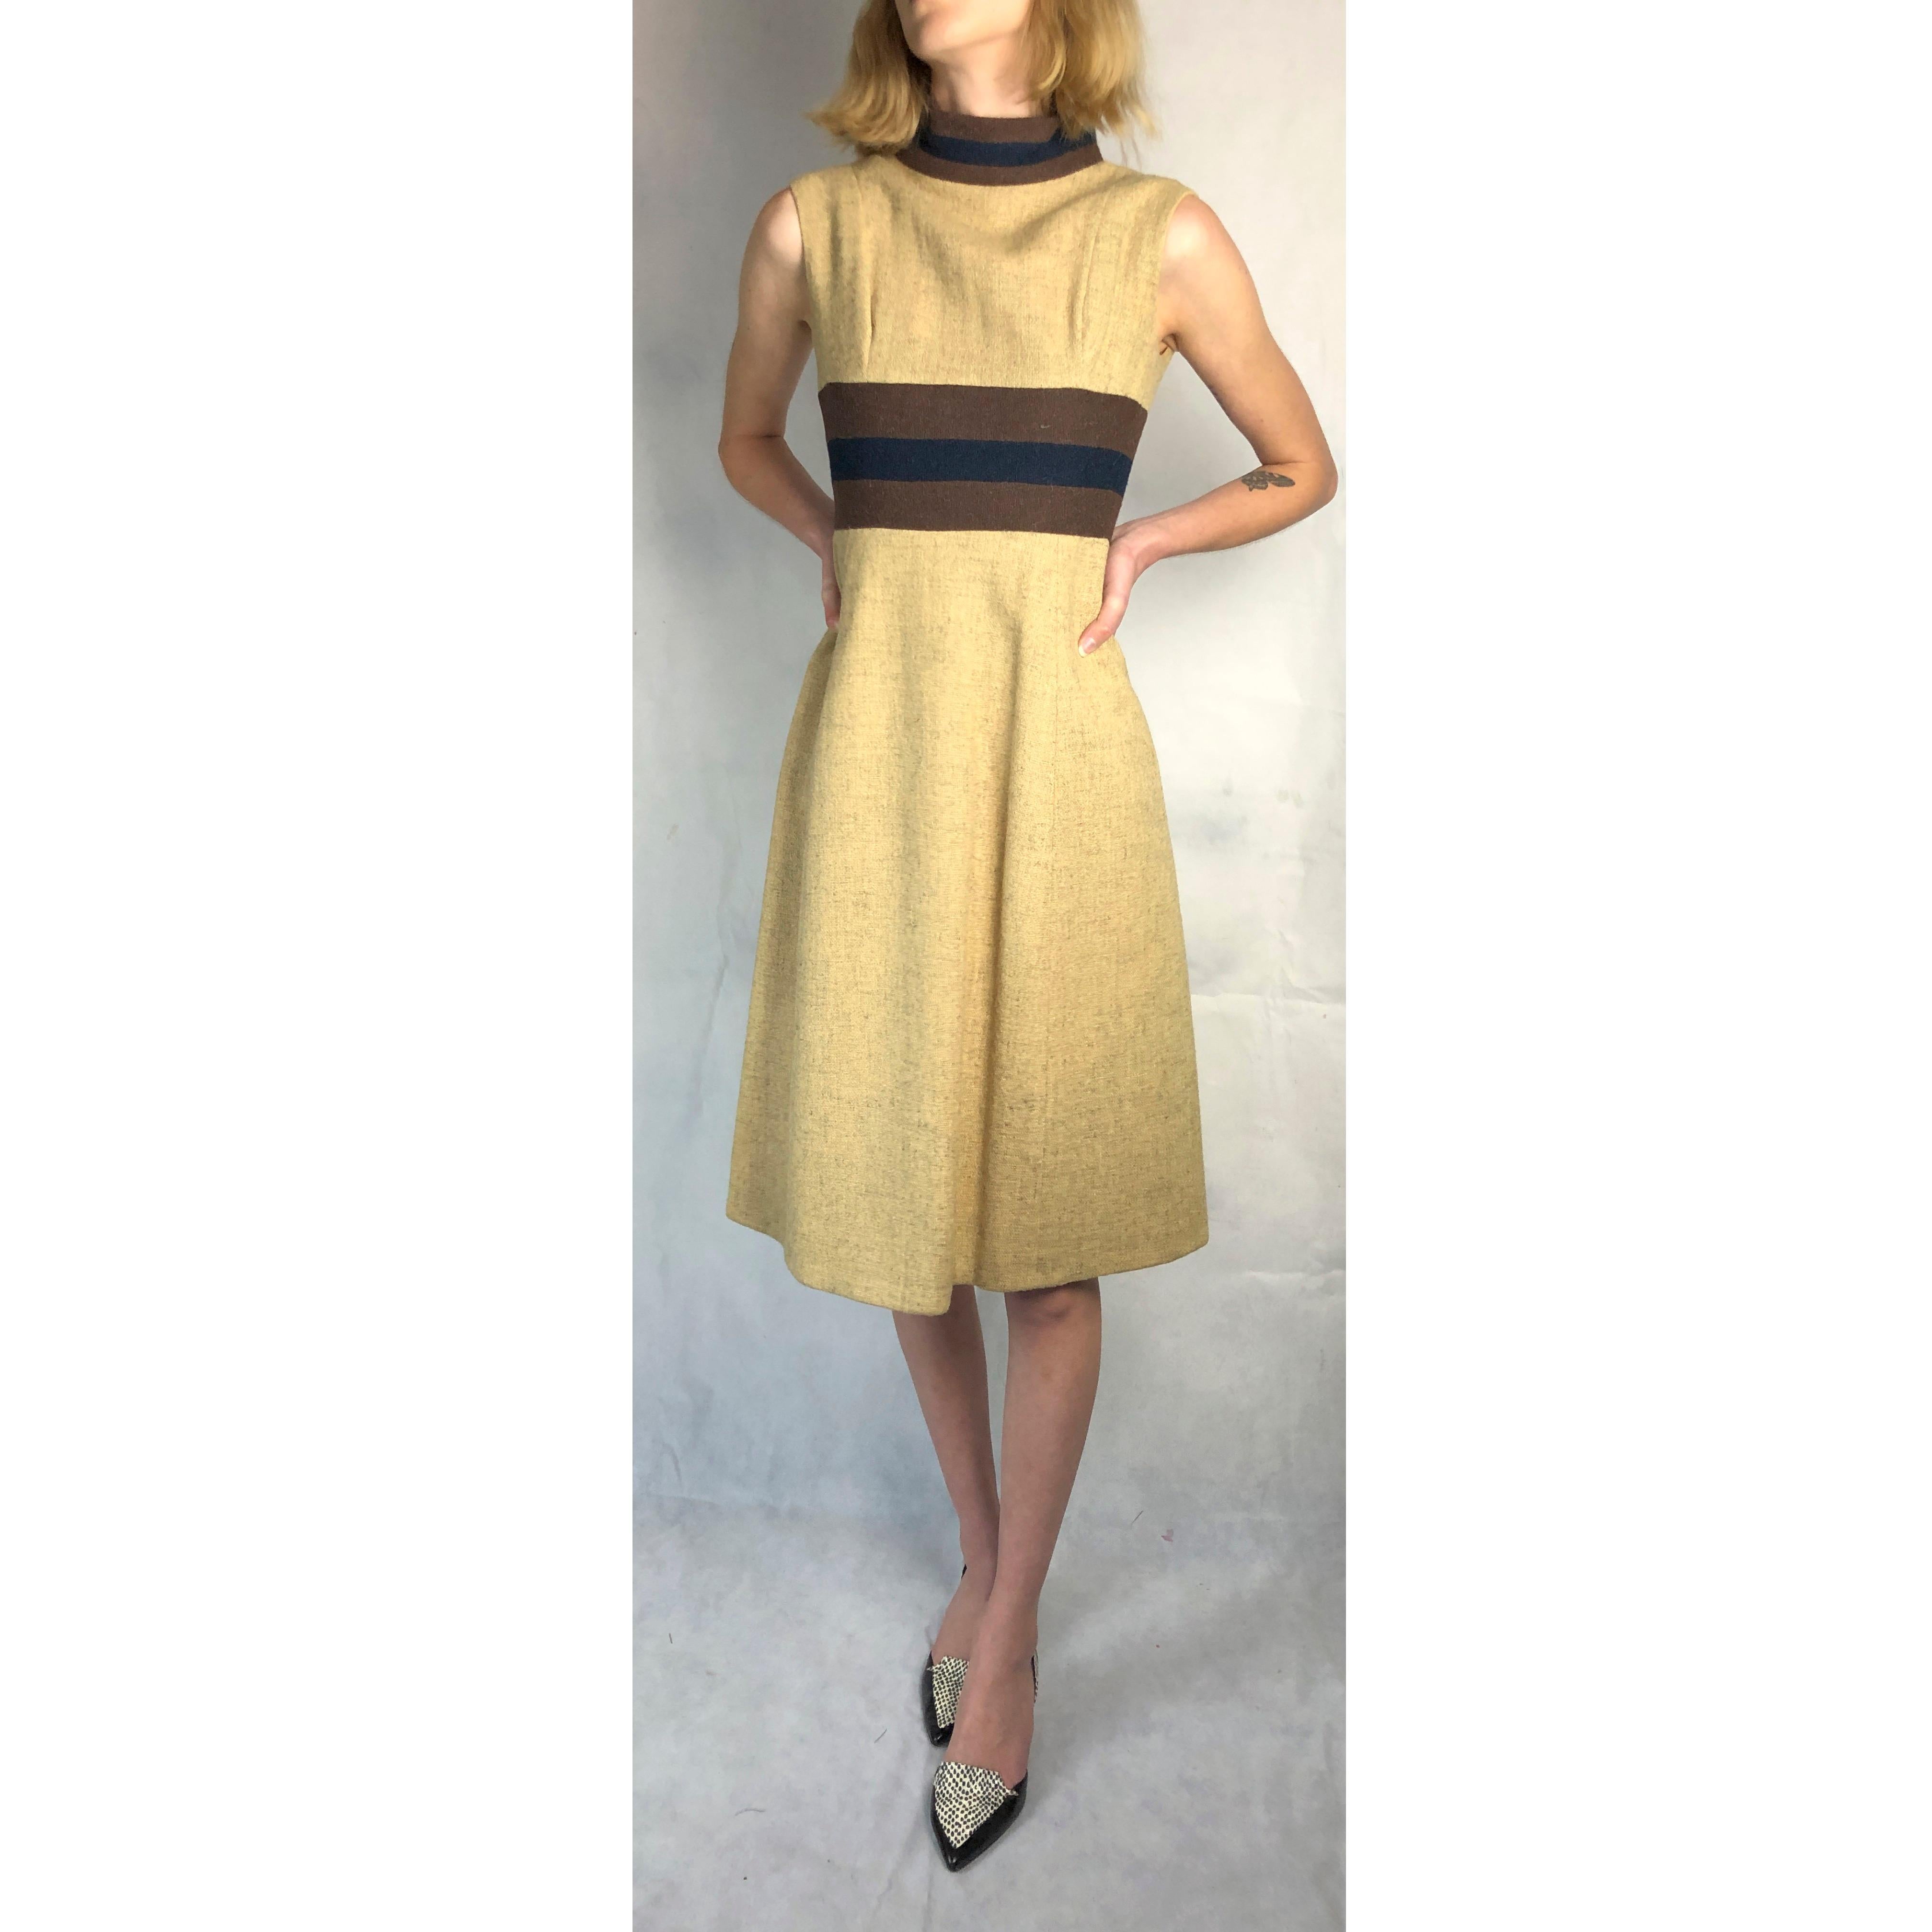 Women's Rare Museum worthy Mary Quant wool dress, circa 1960s. For Sale